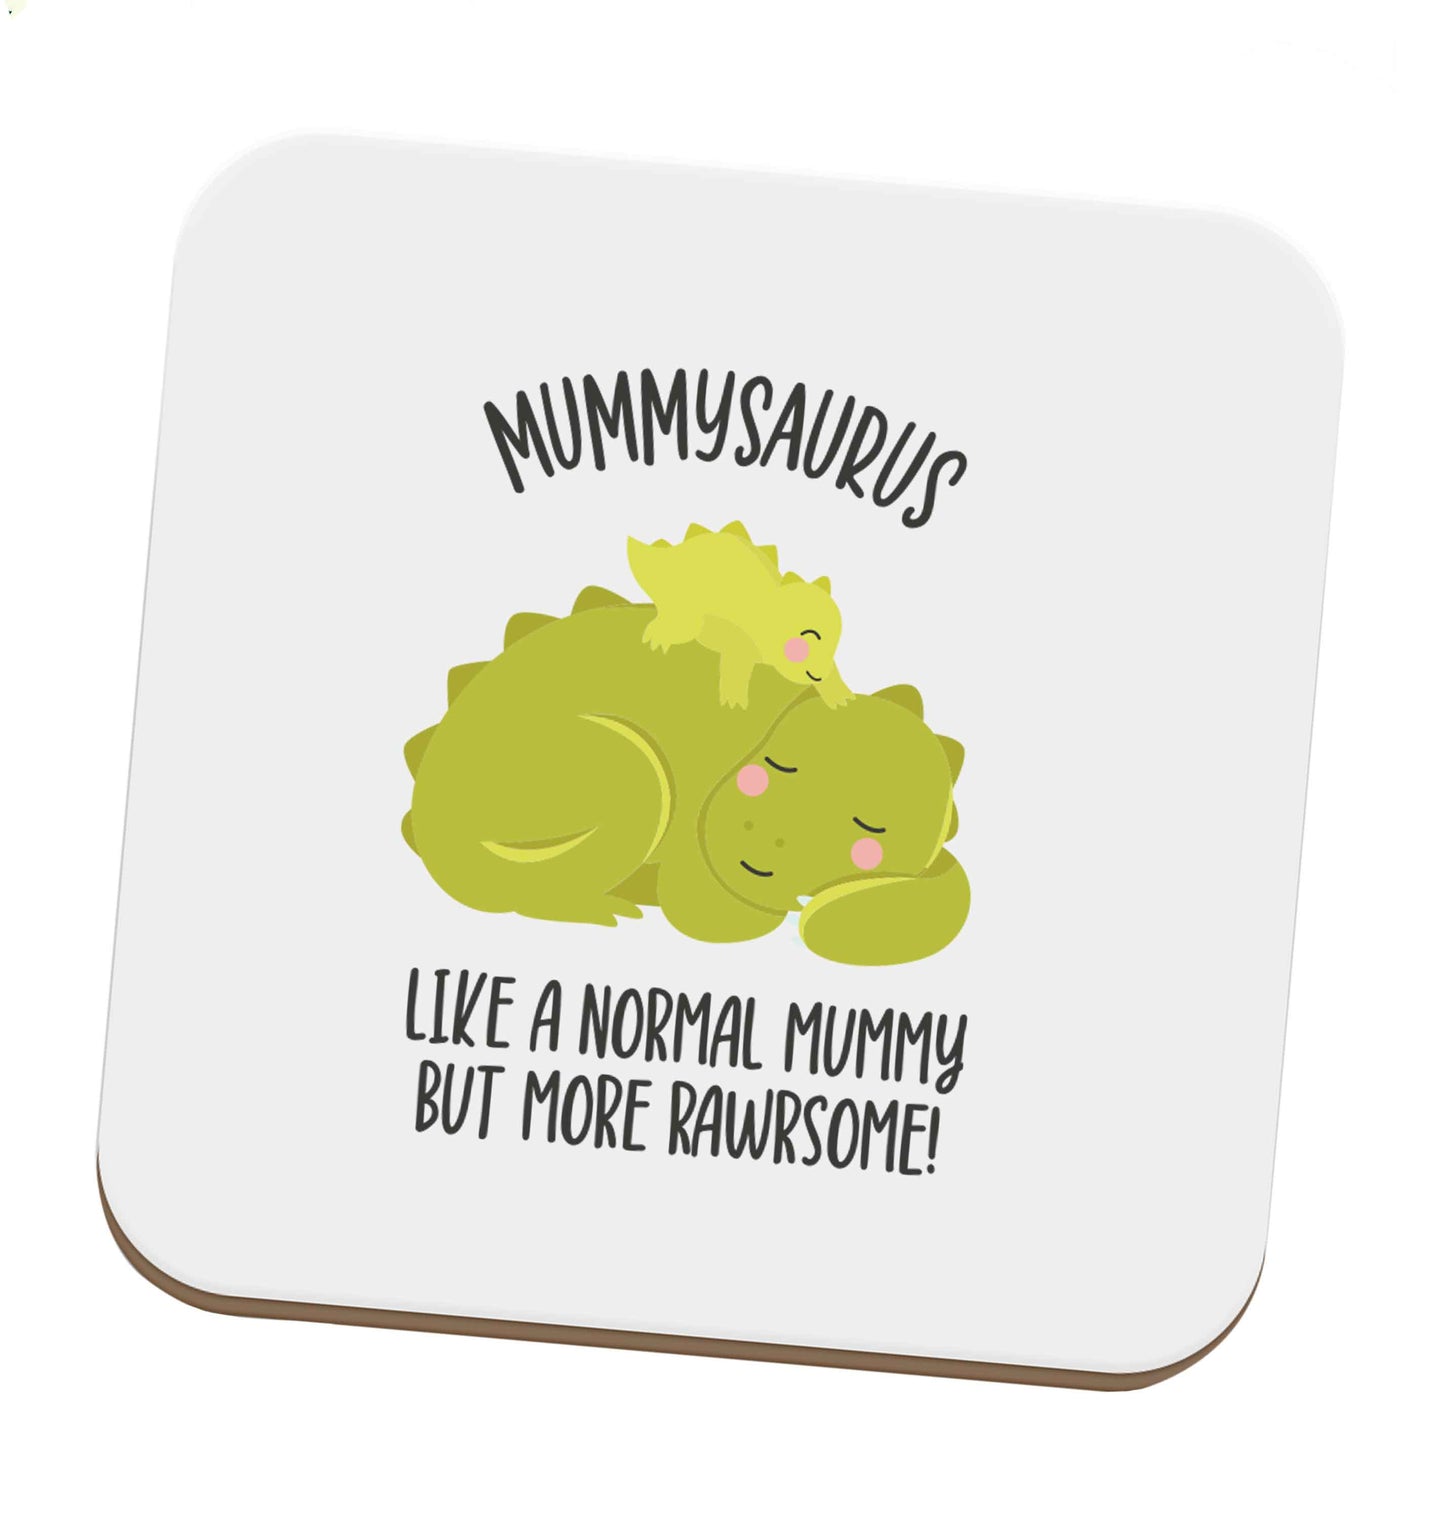 Mummysaurus like a normal mummy only more rawrsome set of four coasters